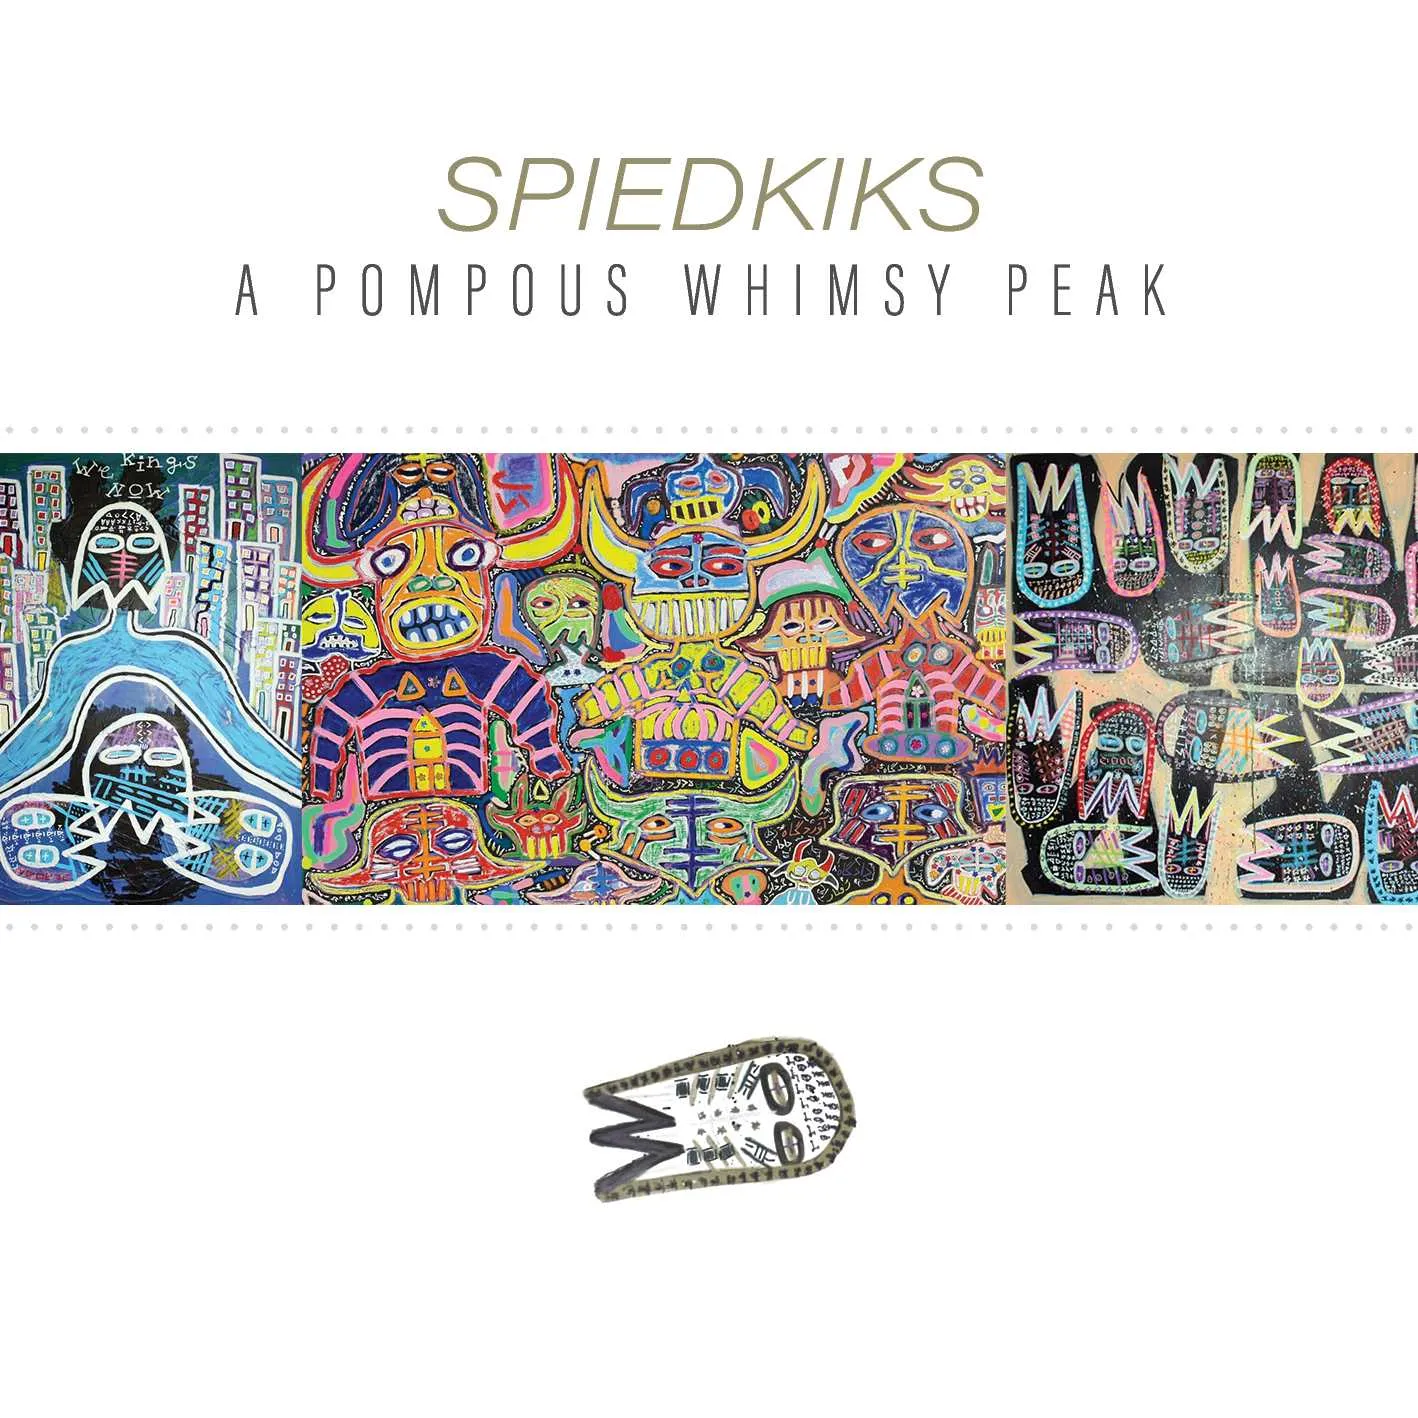 Album cover for “A Pompous Whimsy Peak” by Spiedkiks